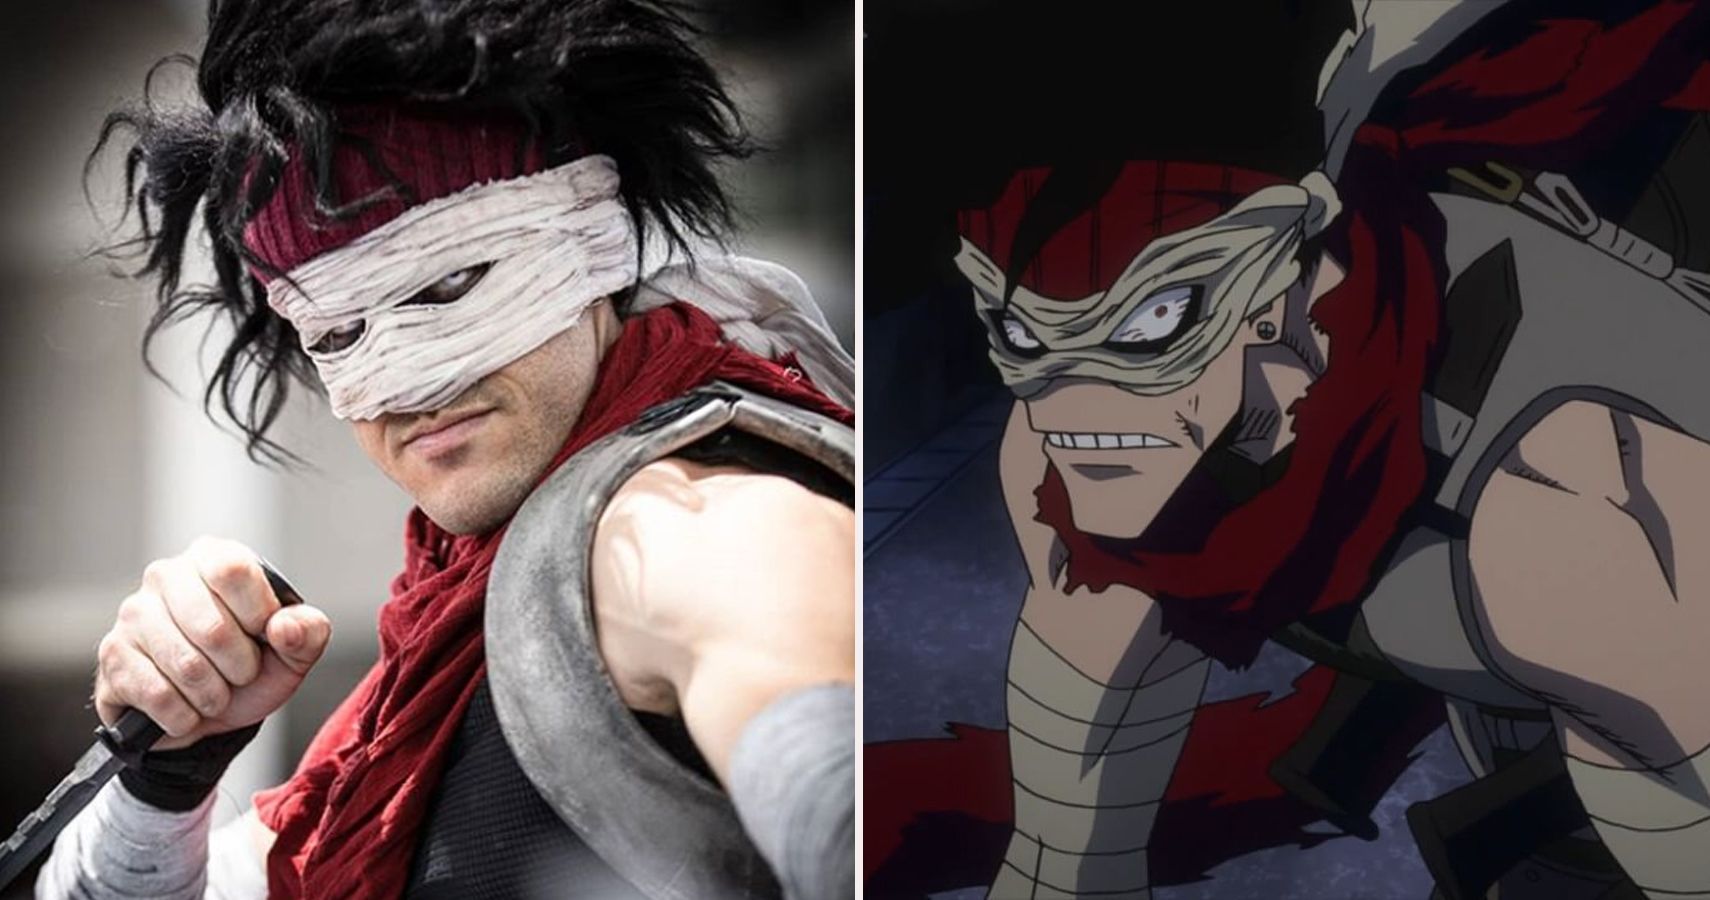 20 Halloween Costumes Inspired By Anime And Manga To Dress Up With